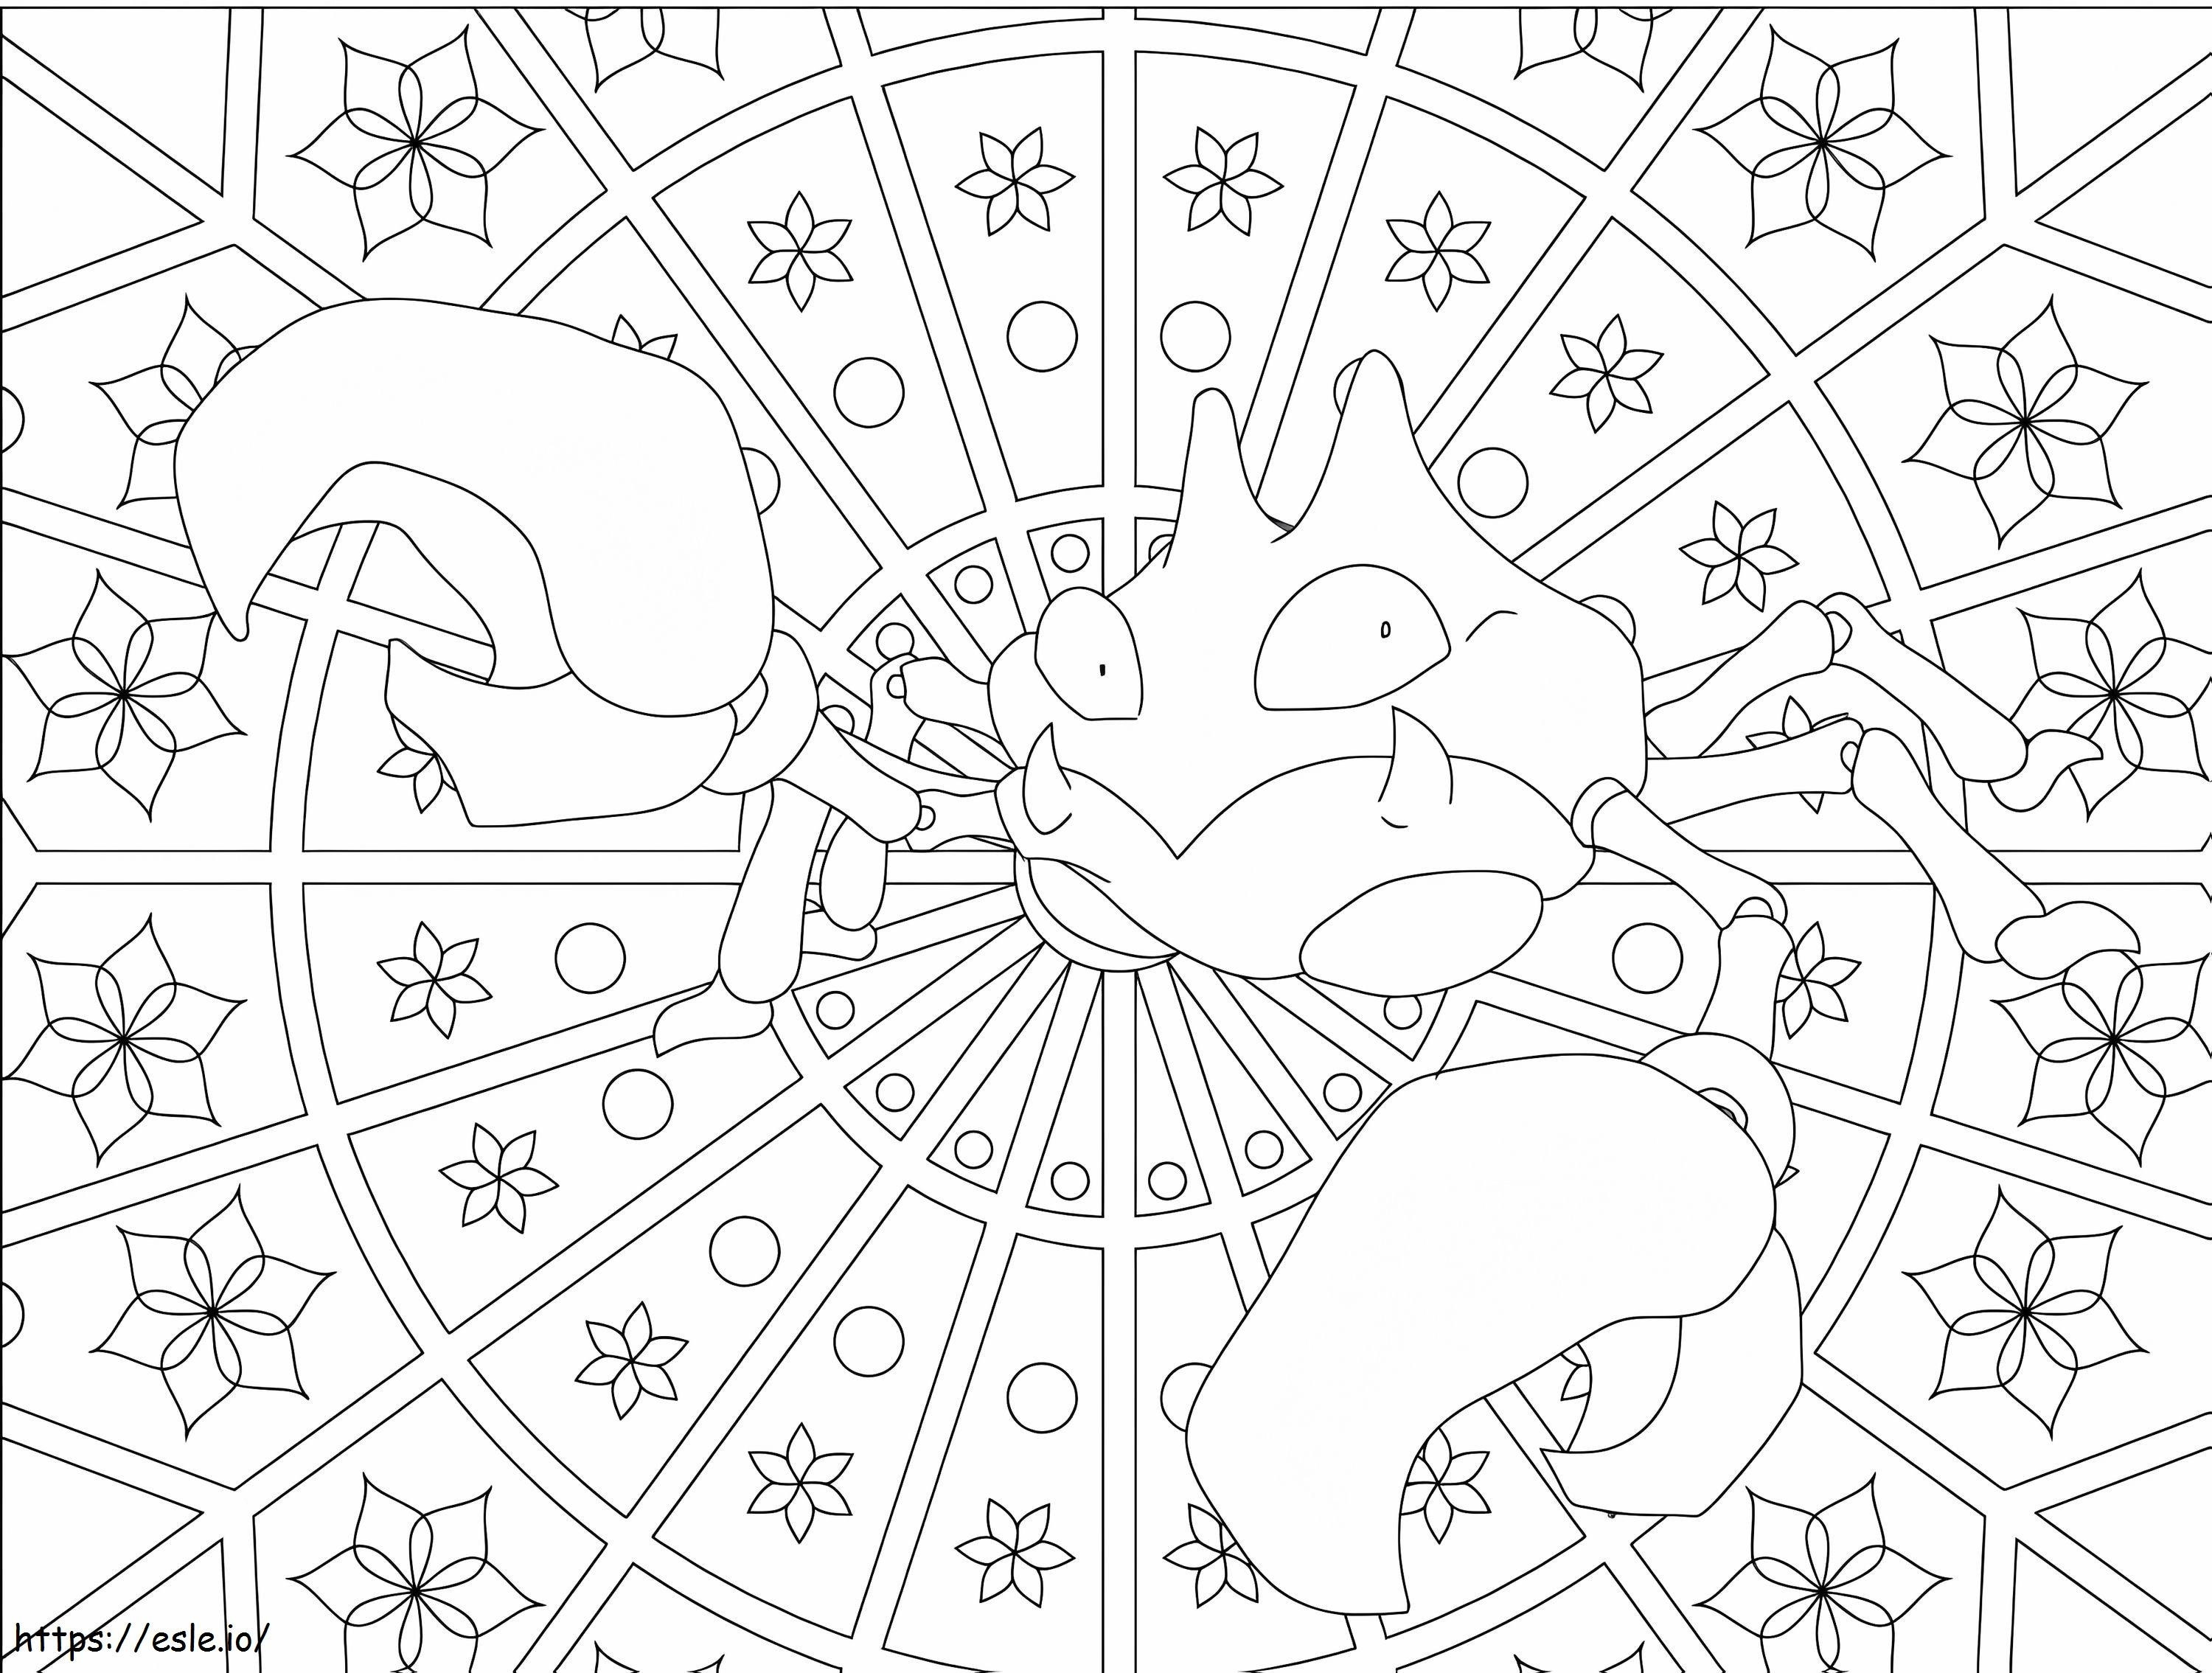 Krabby 5 coloring page